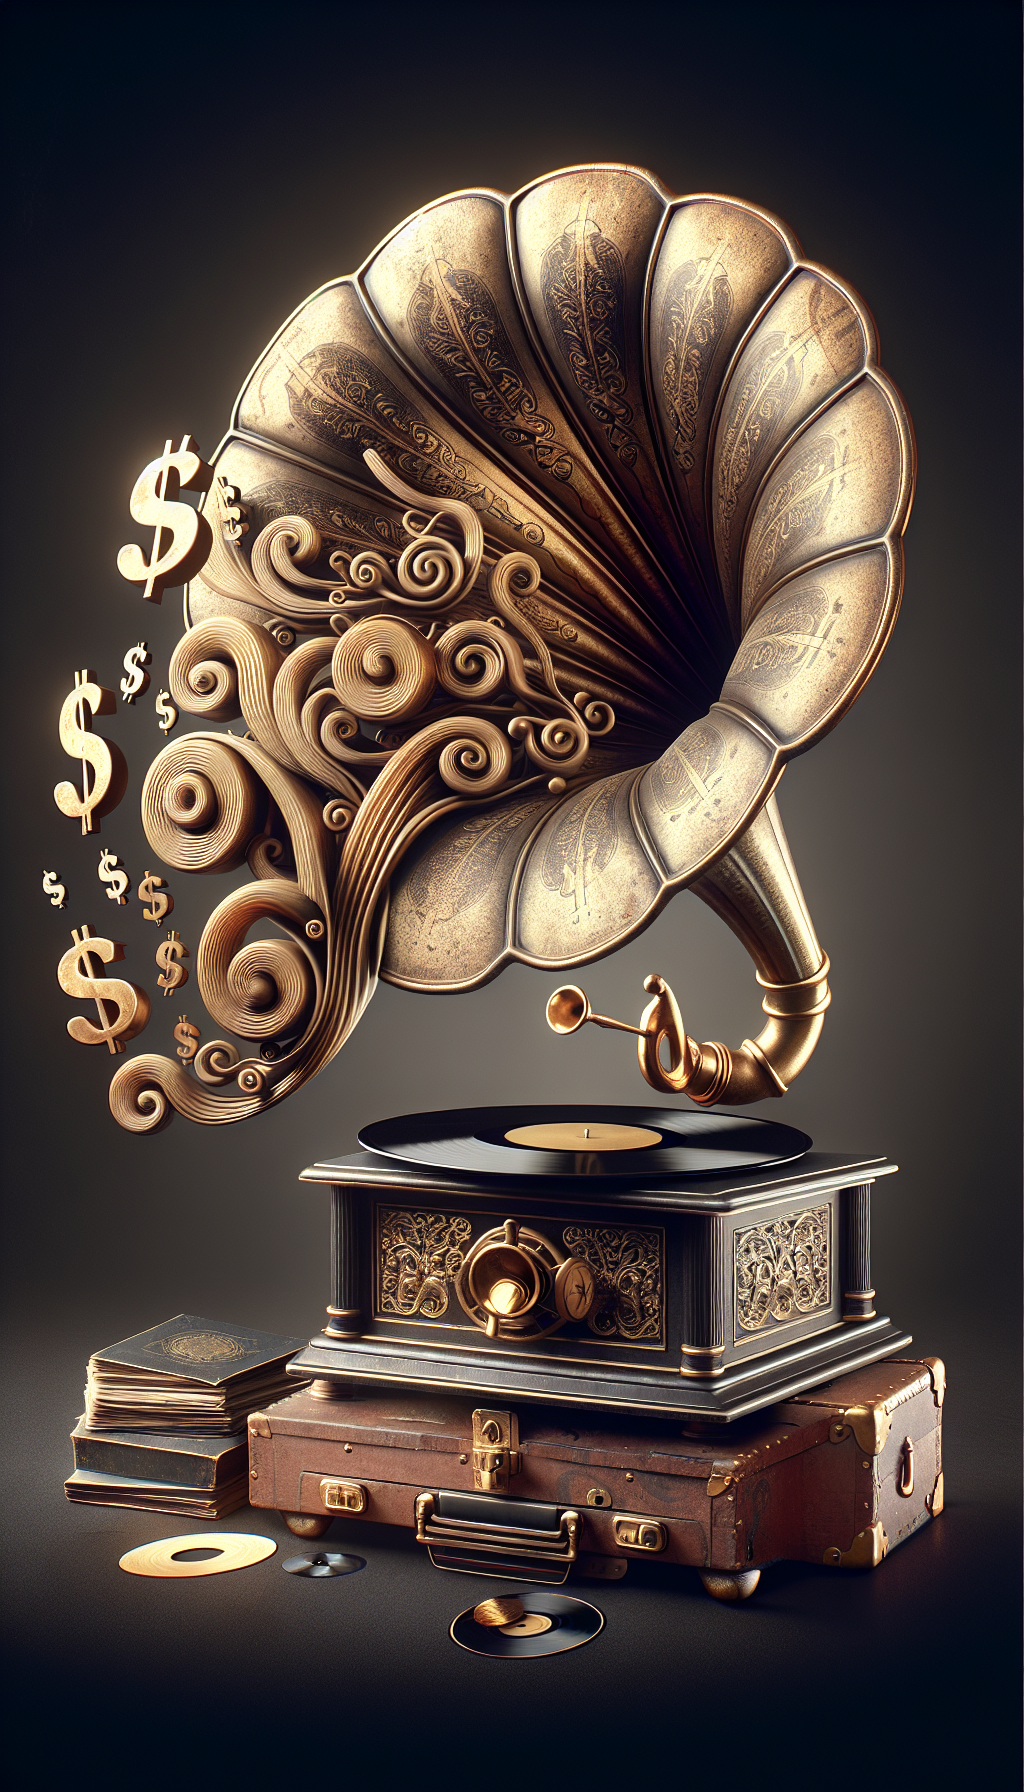 An elegant image crafted in sepia tones, showcasing a pristine Victrola player with golden accents as its horn gracefully morphs into a swirling treasure map. Vintage dollar signs, like musical notes, float from the horn, leading to a chest of classic vinyl records, embodying the timeless value and captivating charm of antiquity within the sphere of music history.